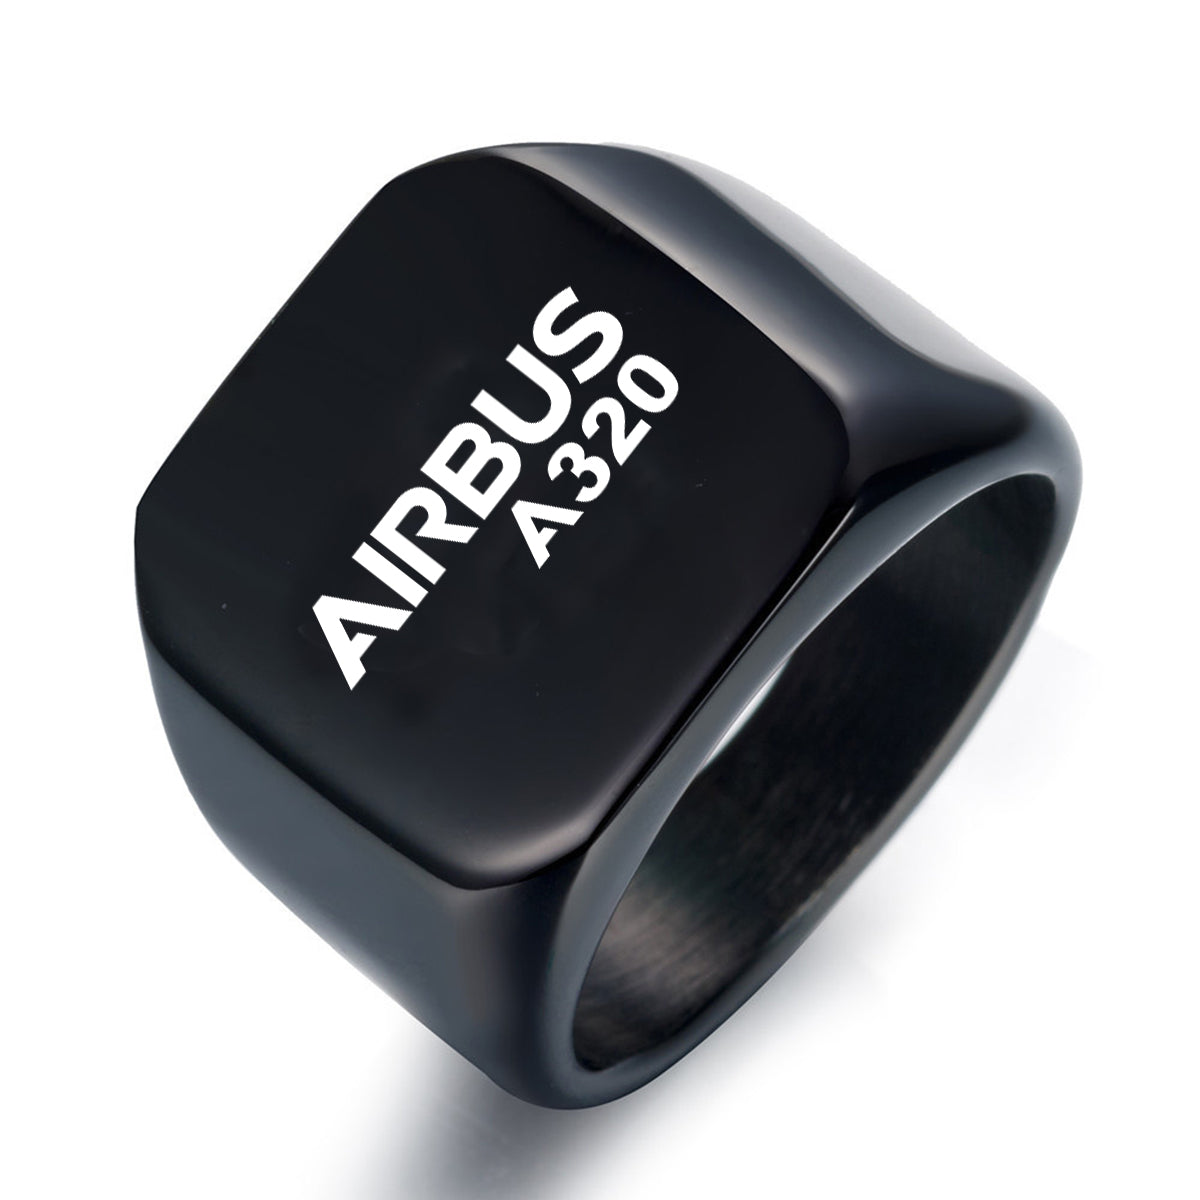 Airbus A320 & Text Designed Men Rings